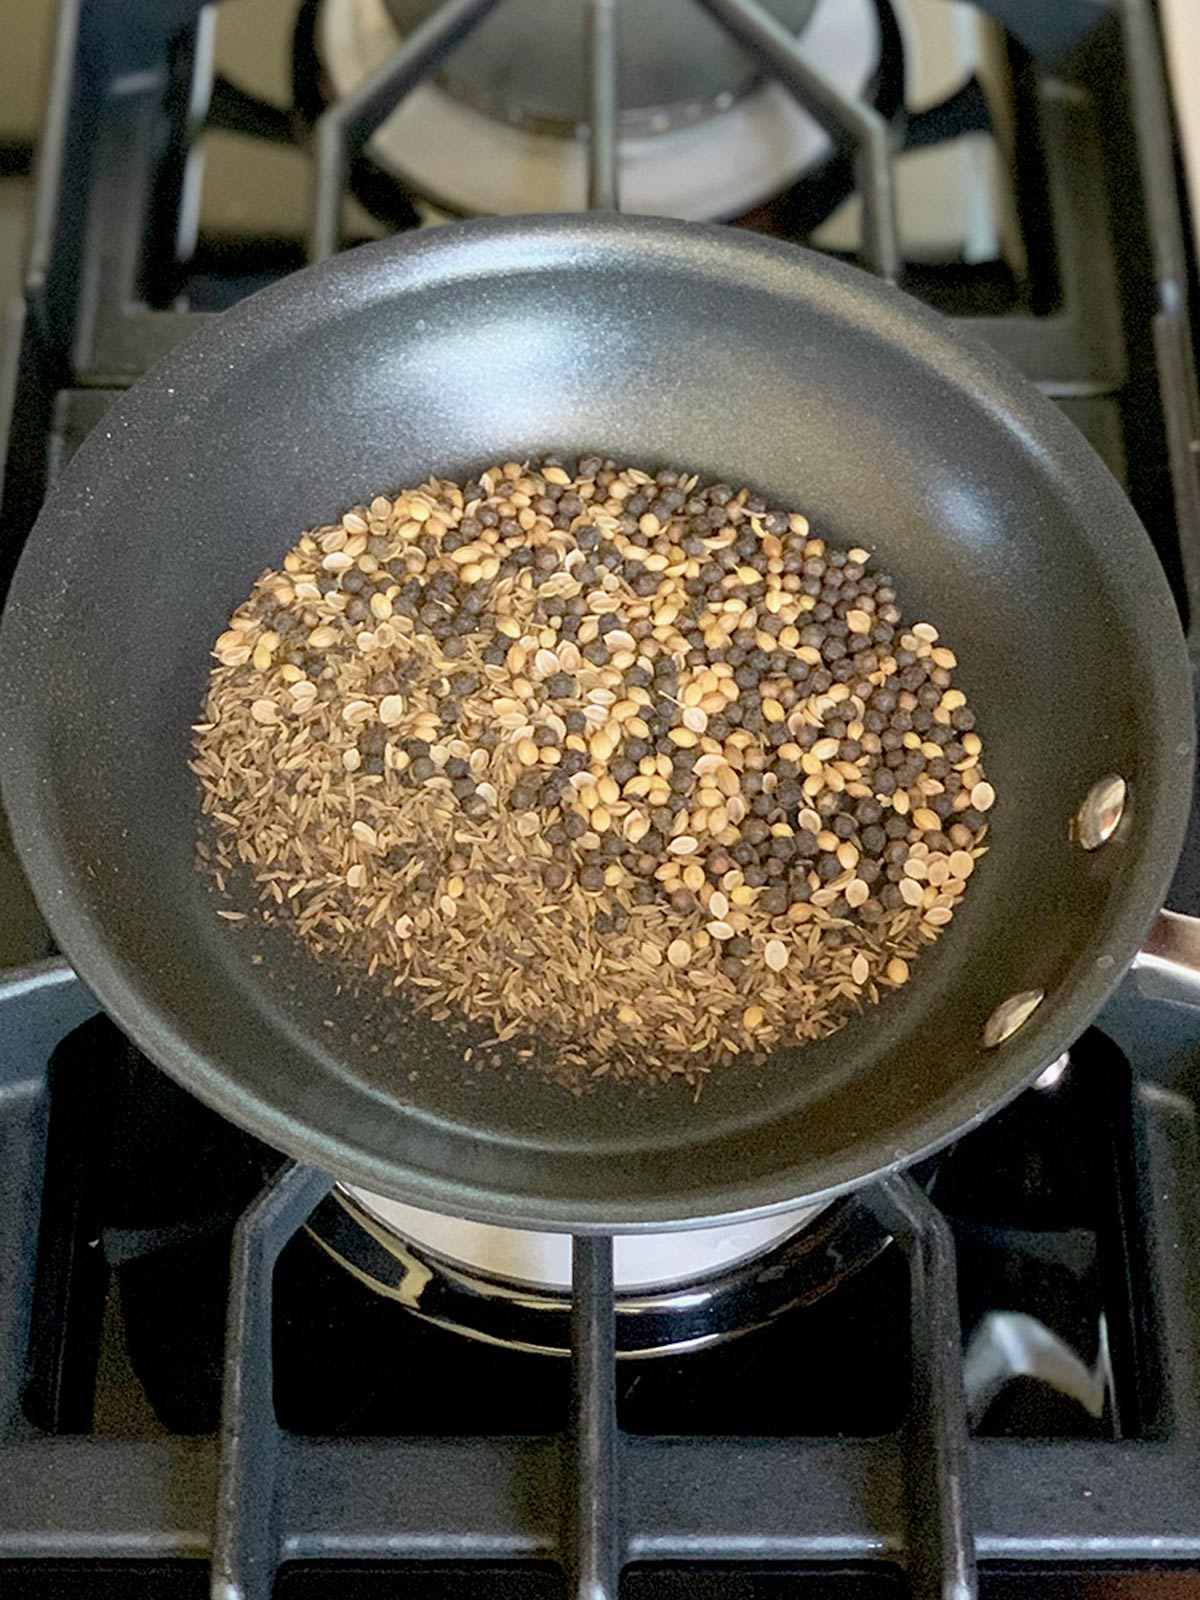 Whole spices in frying pan heating up on stove top.